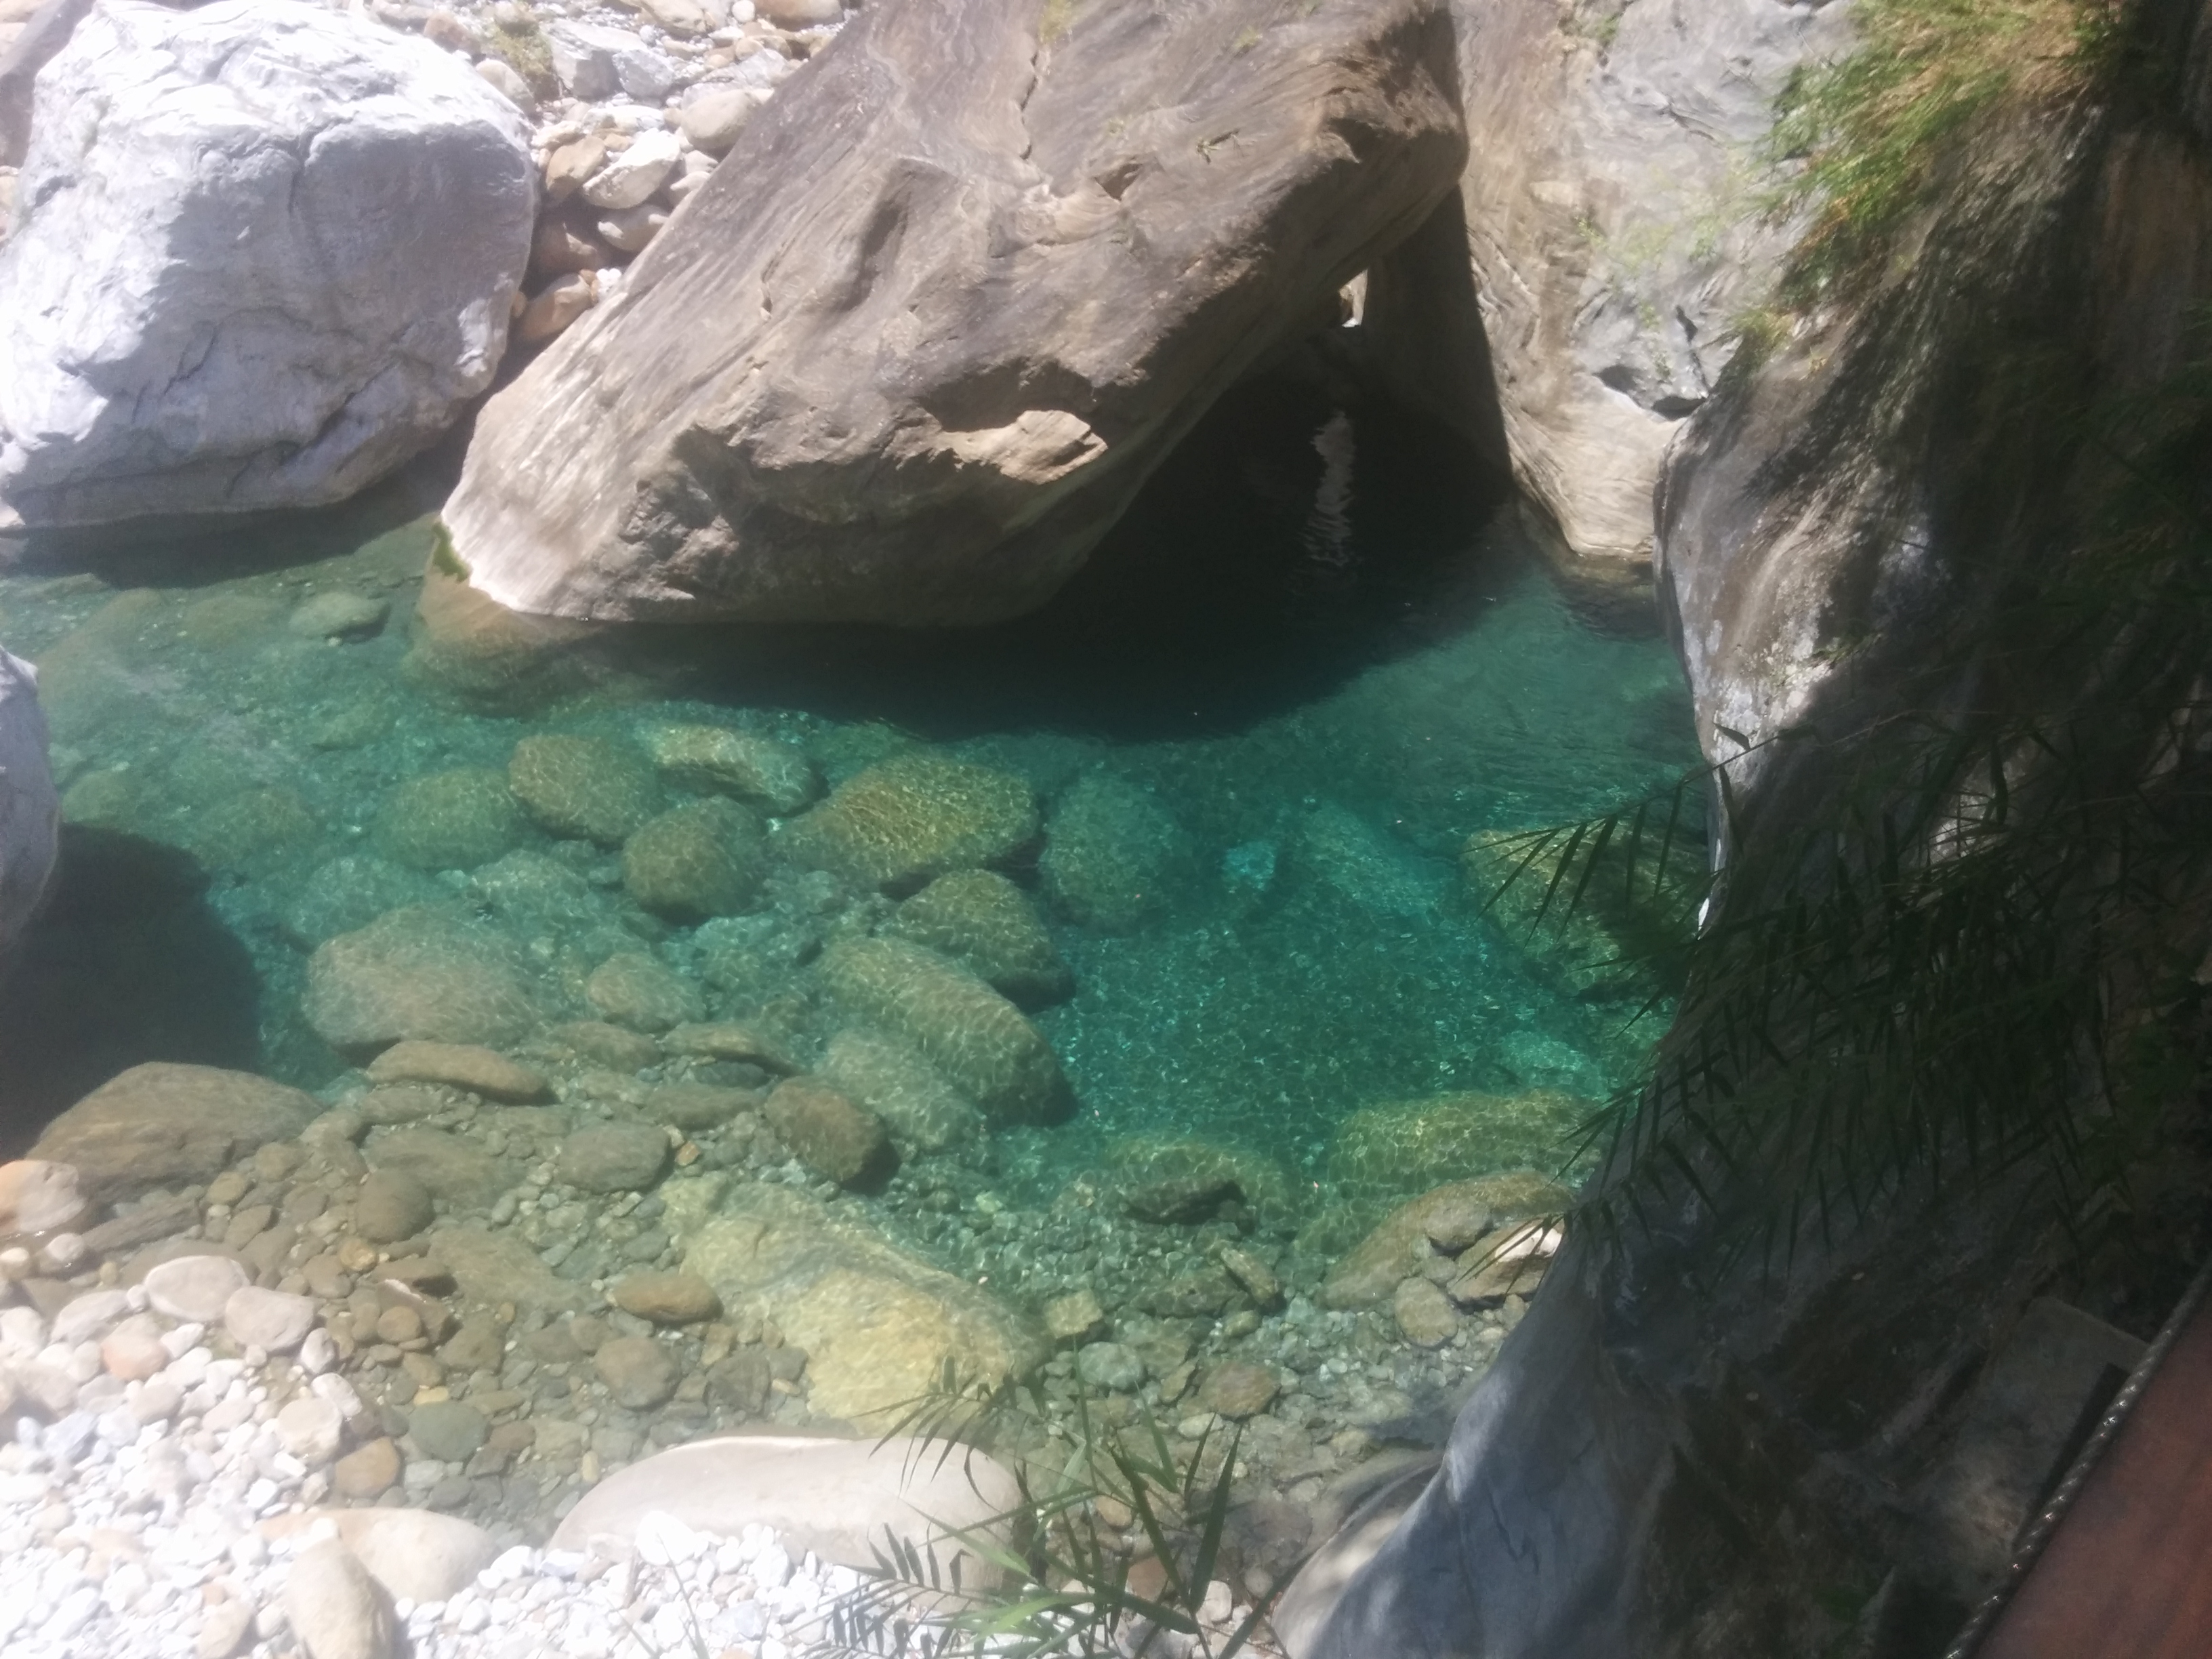 Shakadang's river water is bright blue and extremely clear